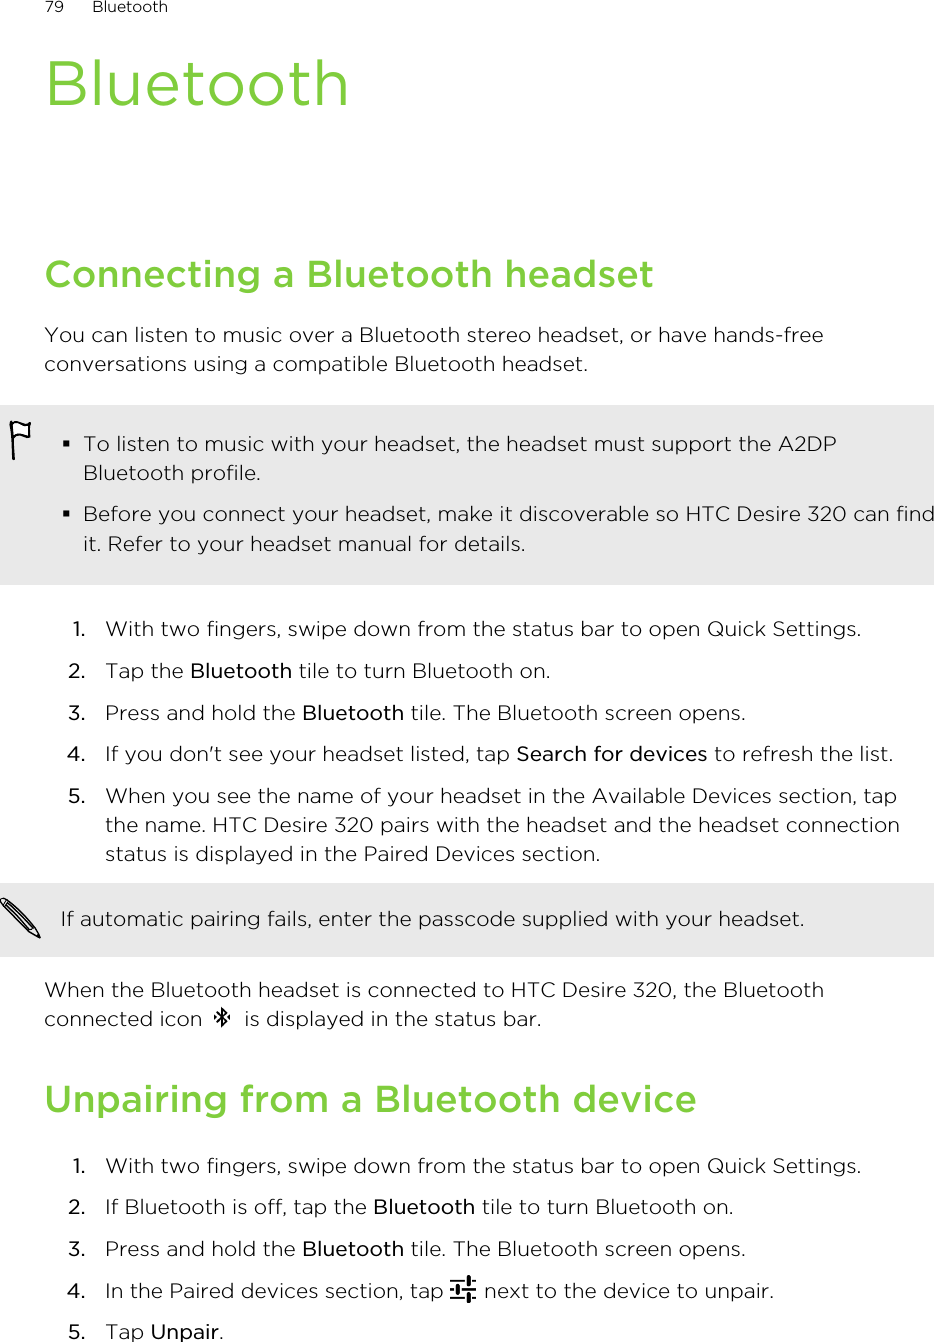 BluetoothConnecting a Bluetooth headsetYou can listen to music over a Bluetooth stereo headset, or have hands-freeconversations using a compatible Bluetooth headset.§To listen to music with your headset, the headset must support the A2DPBluetooth profile.§Before you connect your headset, make it discoverable so HTC Desire 320 can findit. Refer to your headset manual for details.1. With two fingers, swipe down from the status bar to open Quick Settings.2. Tap the Bluetooth tile to turn Bluetooth on.3. Press and hold the Bluetooth tile. The Bluetooth screen opens.4. If you don&apos;t see your headset listed, tap Search for devices to refresh the list.5. When you see the name of your headset in the Available Devices section, tapthe name. HTC Desire 320 pairs with the headset and the headset connectionstatus is displayed in the Paired Devices section.If automatic pairing fails, enter the passcode supplied with your headset.When the Bluetooth headset is connected to HTC Desire 320, the Bluetoothconnected icon   is displayed in the status bar.Unpairing from a Bluetooth device1. With two fingers, swipe down from the status bar to open Quick Settings.2. If Bluetooth is off, tap the Bluetooth tile to turn Bluetooth on.3. Press and hold the Bluetooth tile. The Bluetooth screen opens.4. In the Paired devices section, tap   next to the device to unpair.5. Tap Unpair.79 Bluetooth